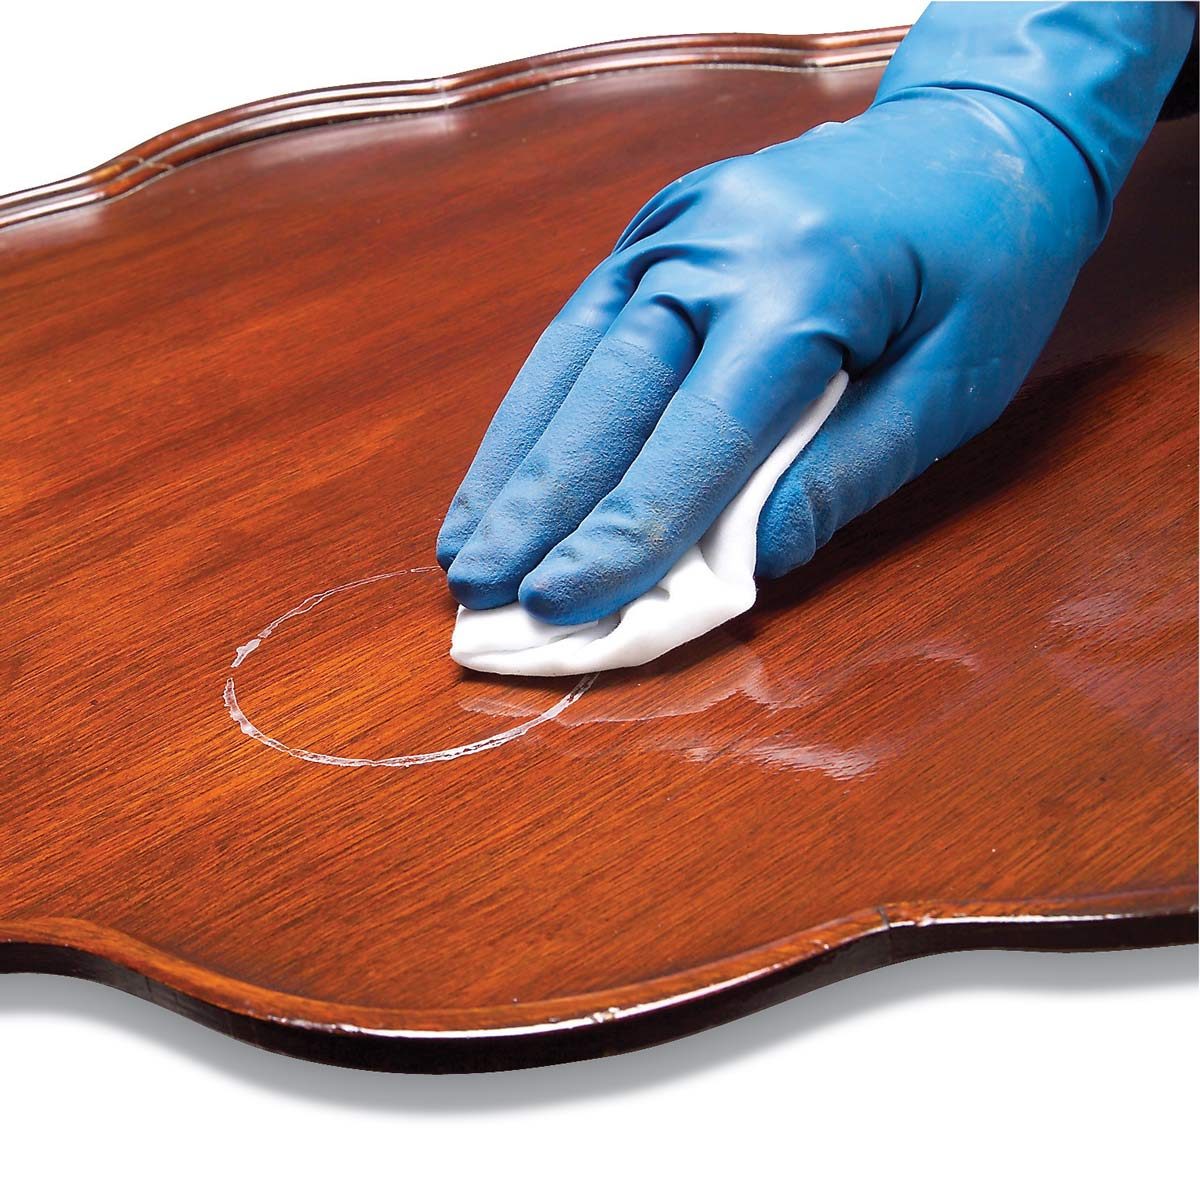 Removing water stain on wood